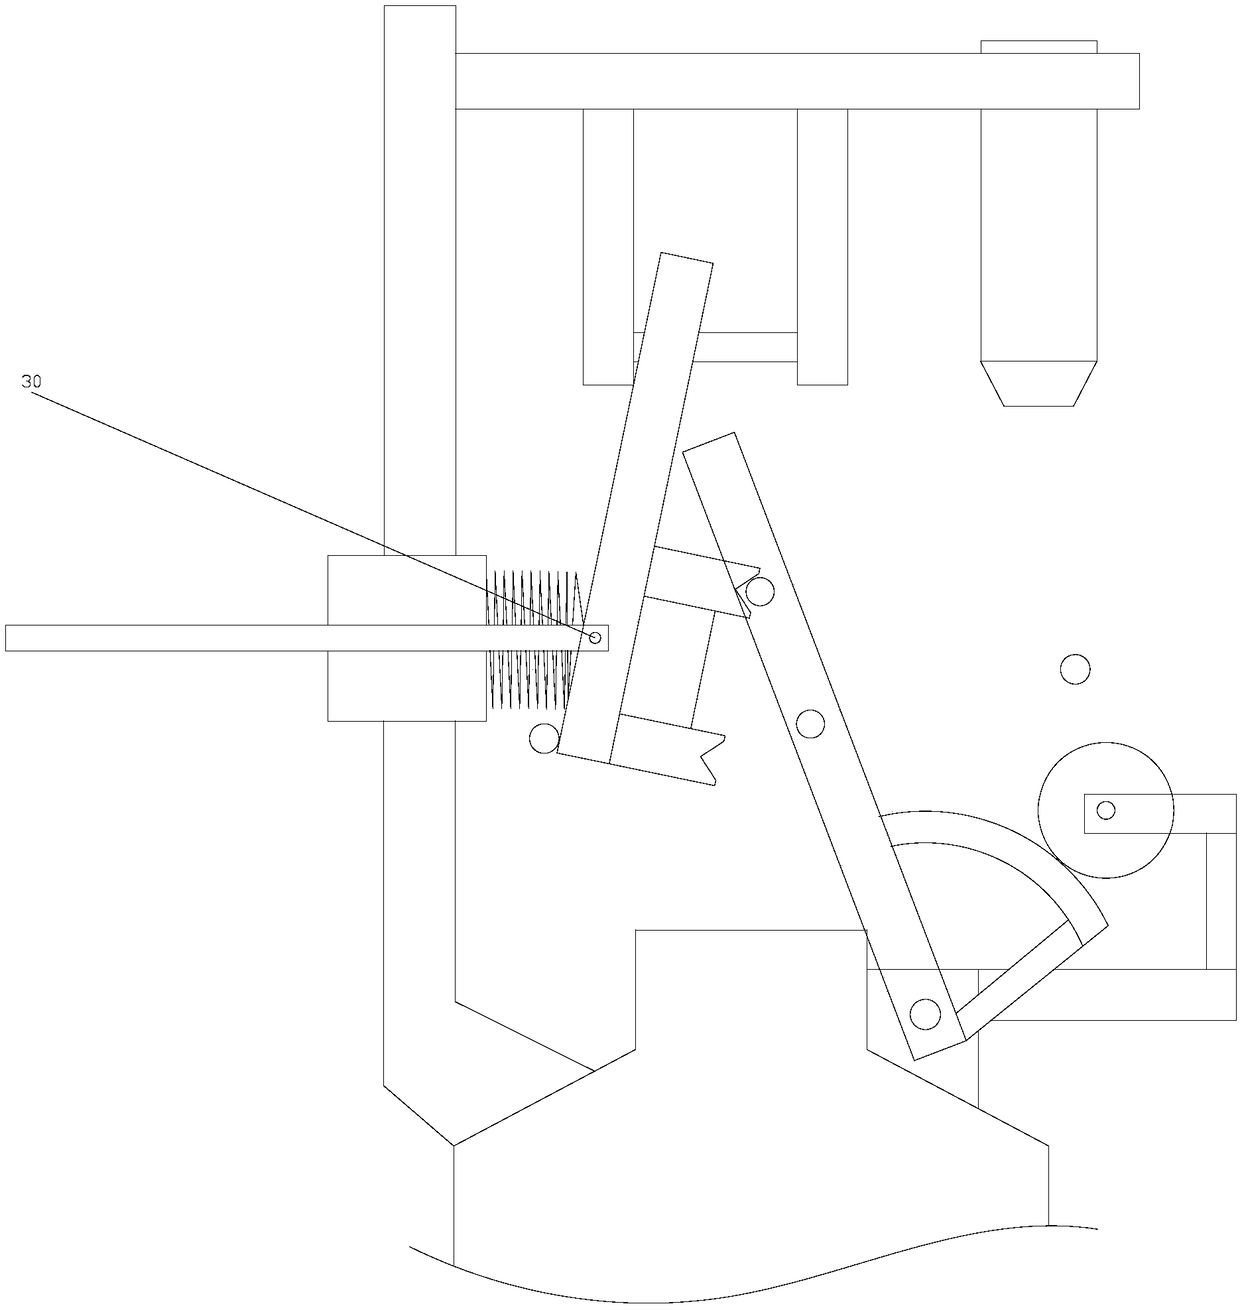 Feeding manipulator for automatic chemical reaction tank